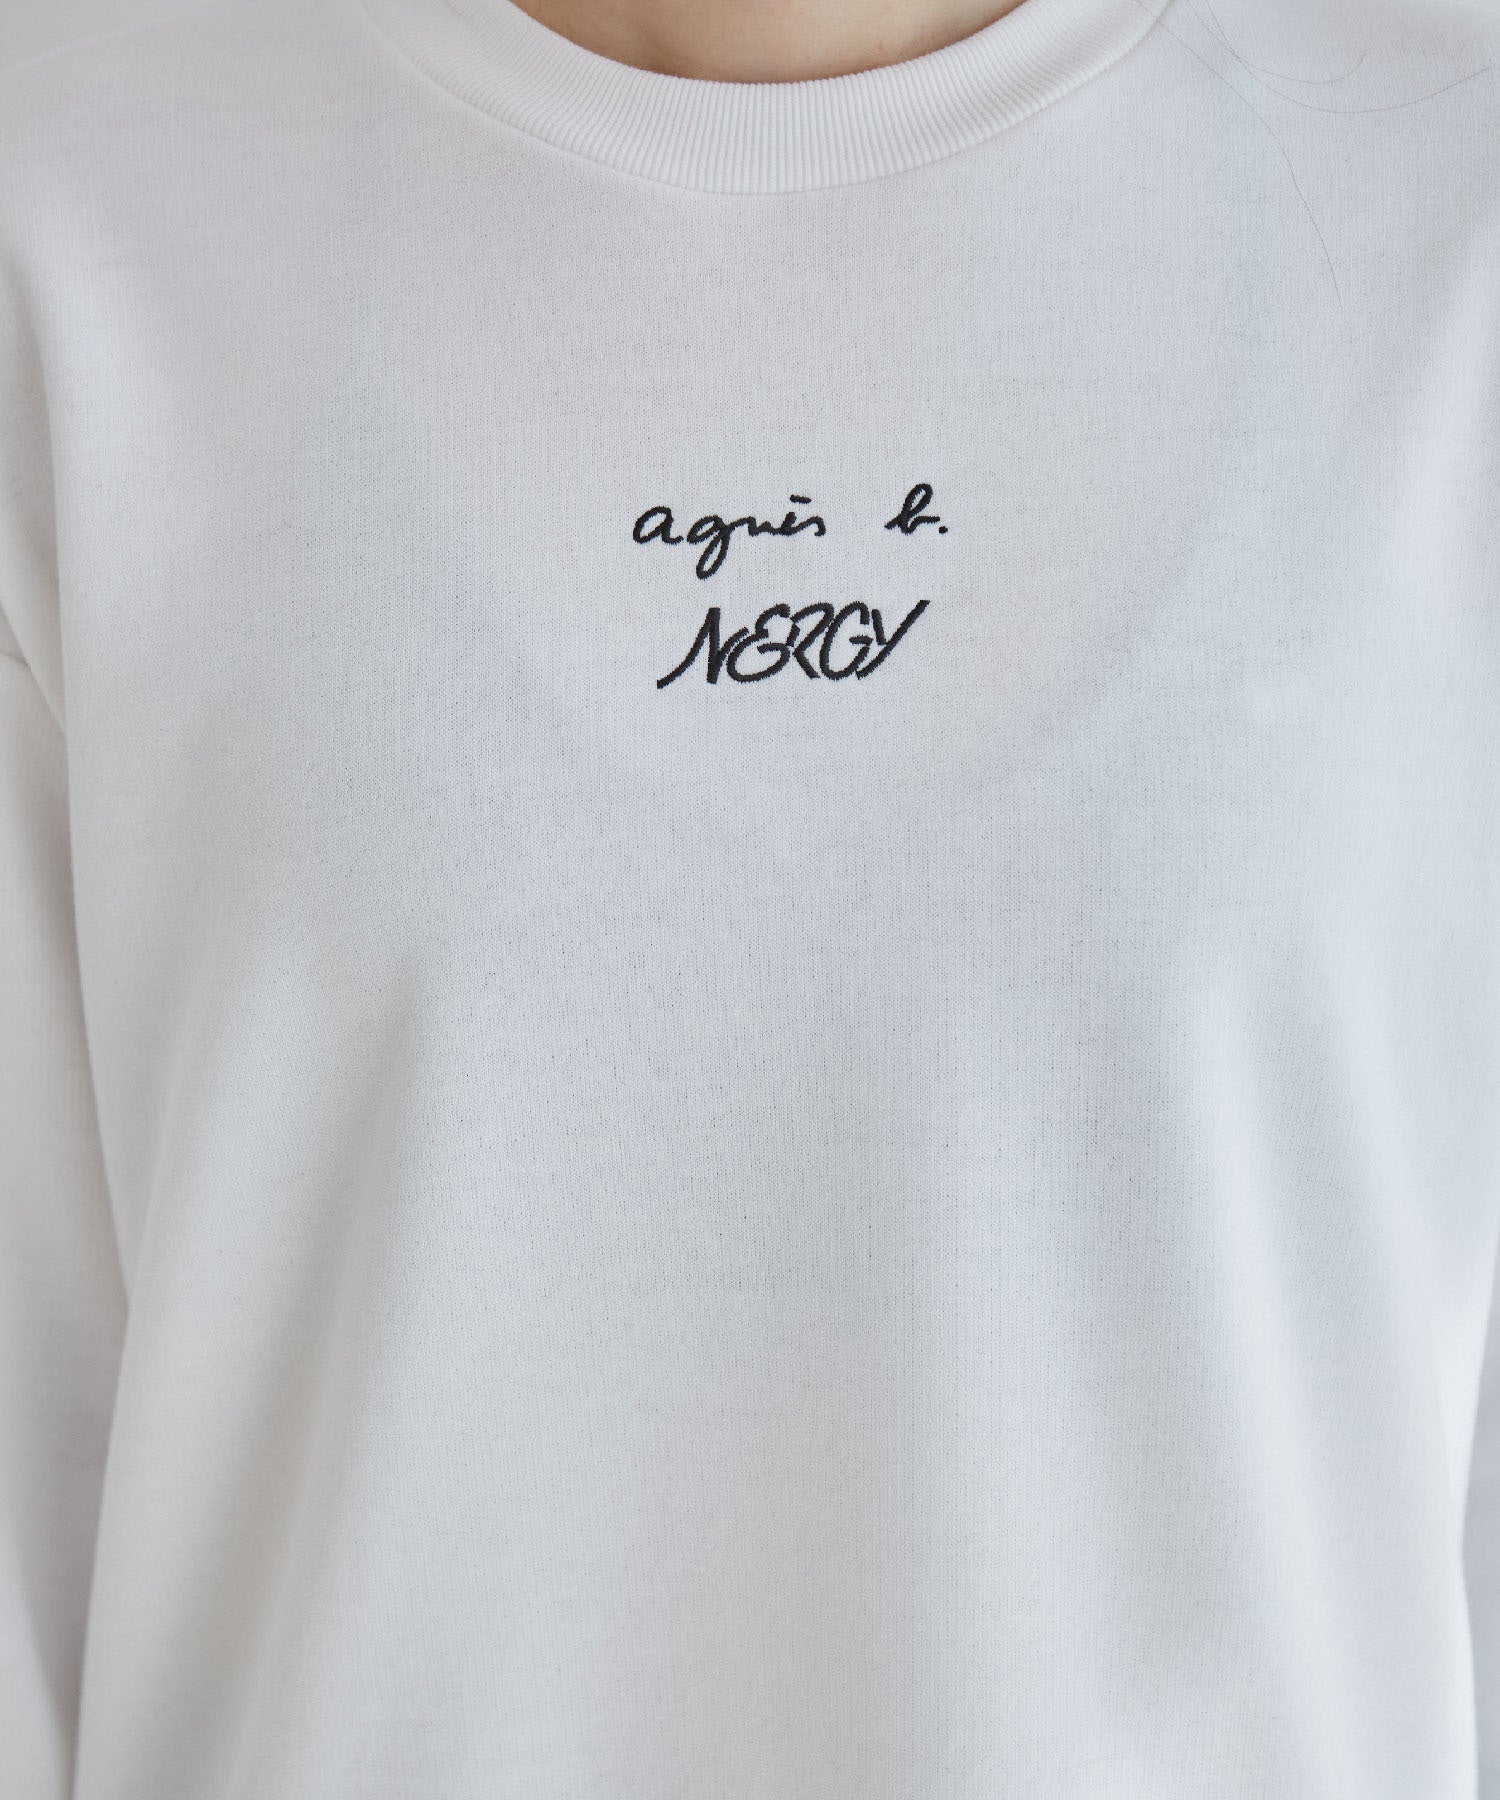 agnes b. NERGY】コラボロゴスウェット｜J'aDoRe JUN ONLINE OUTLET ...